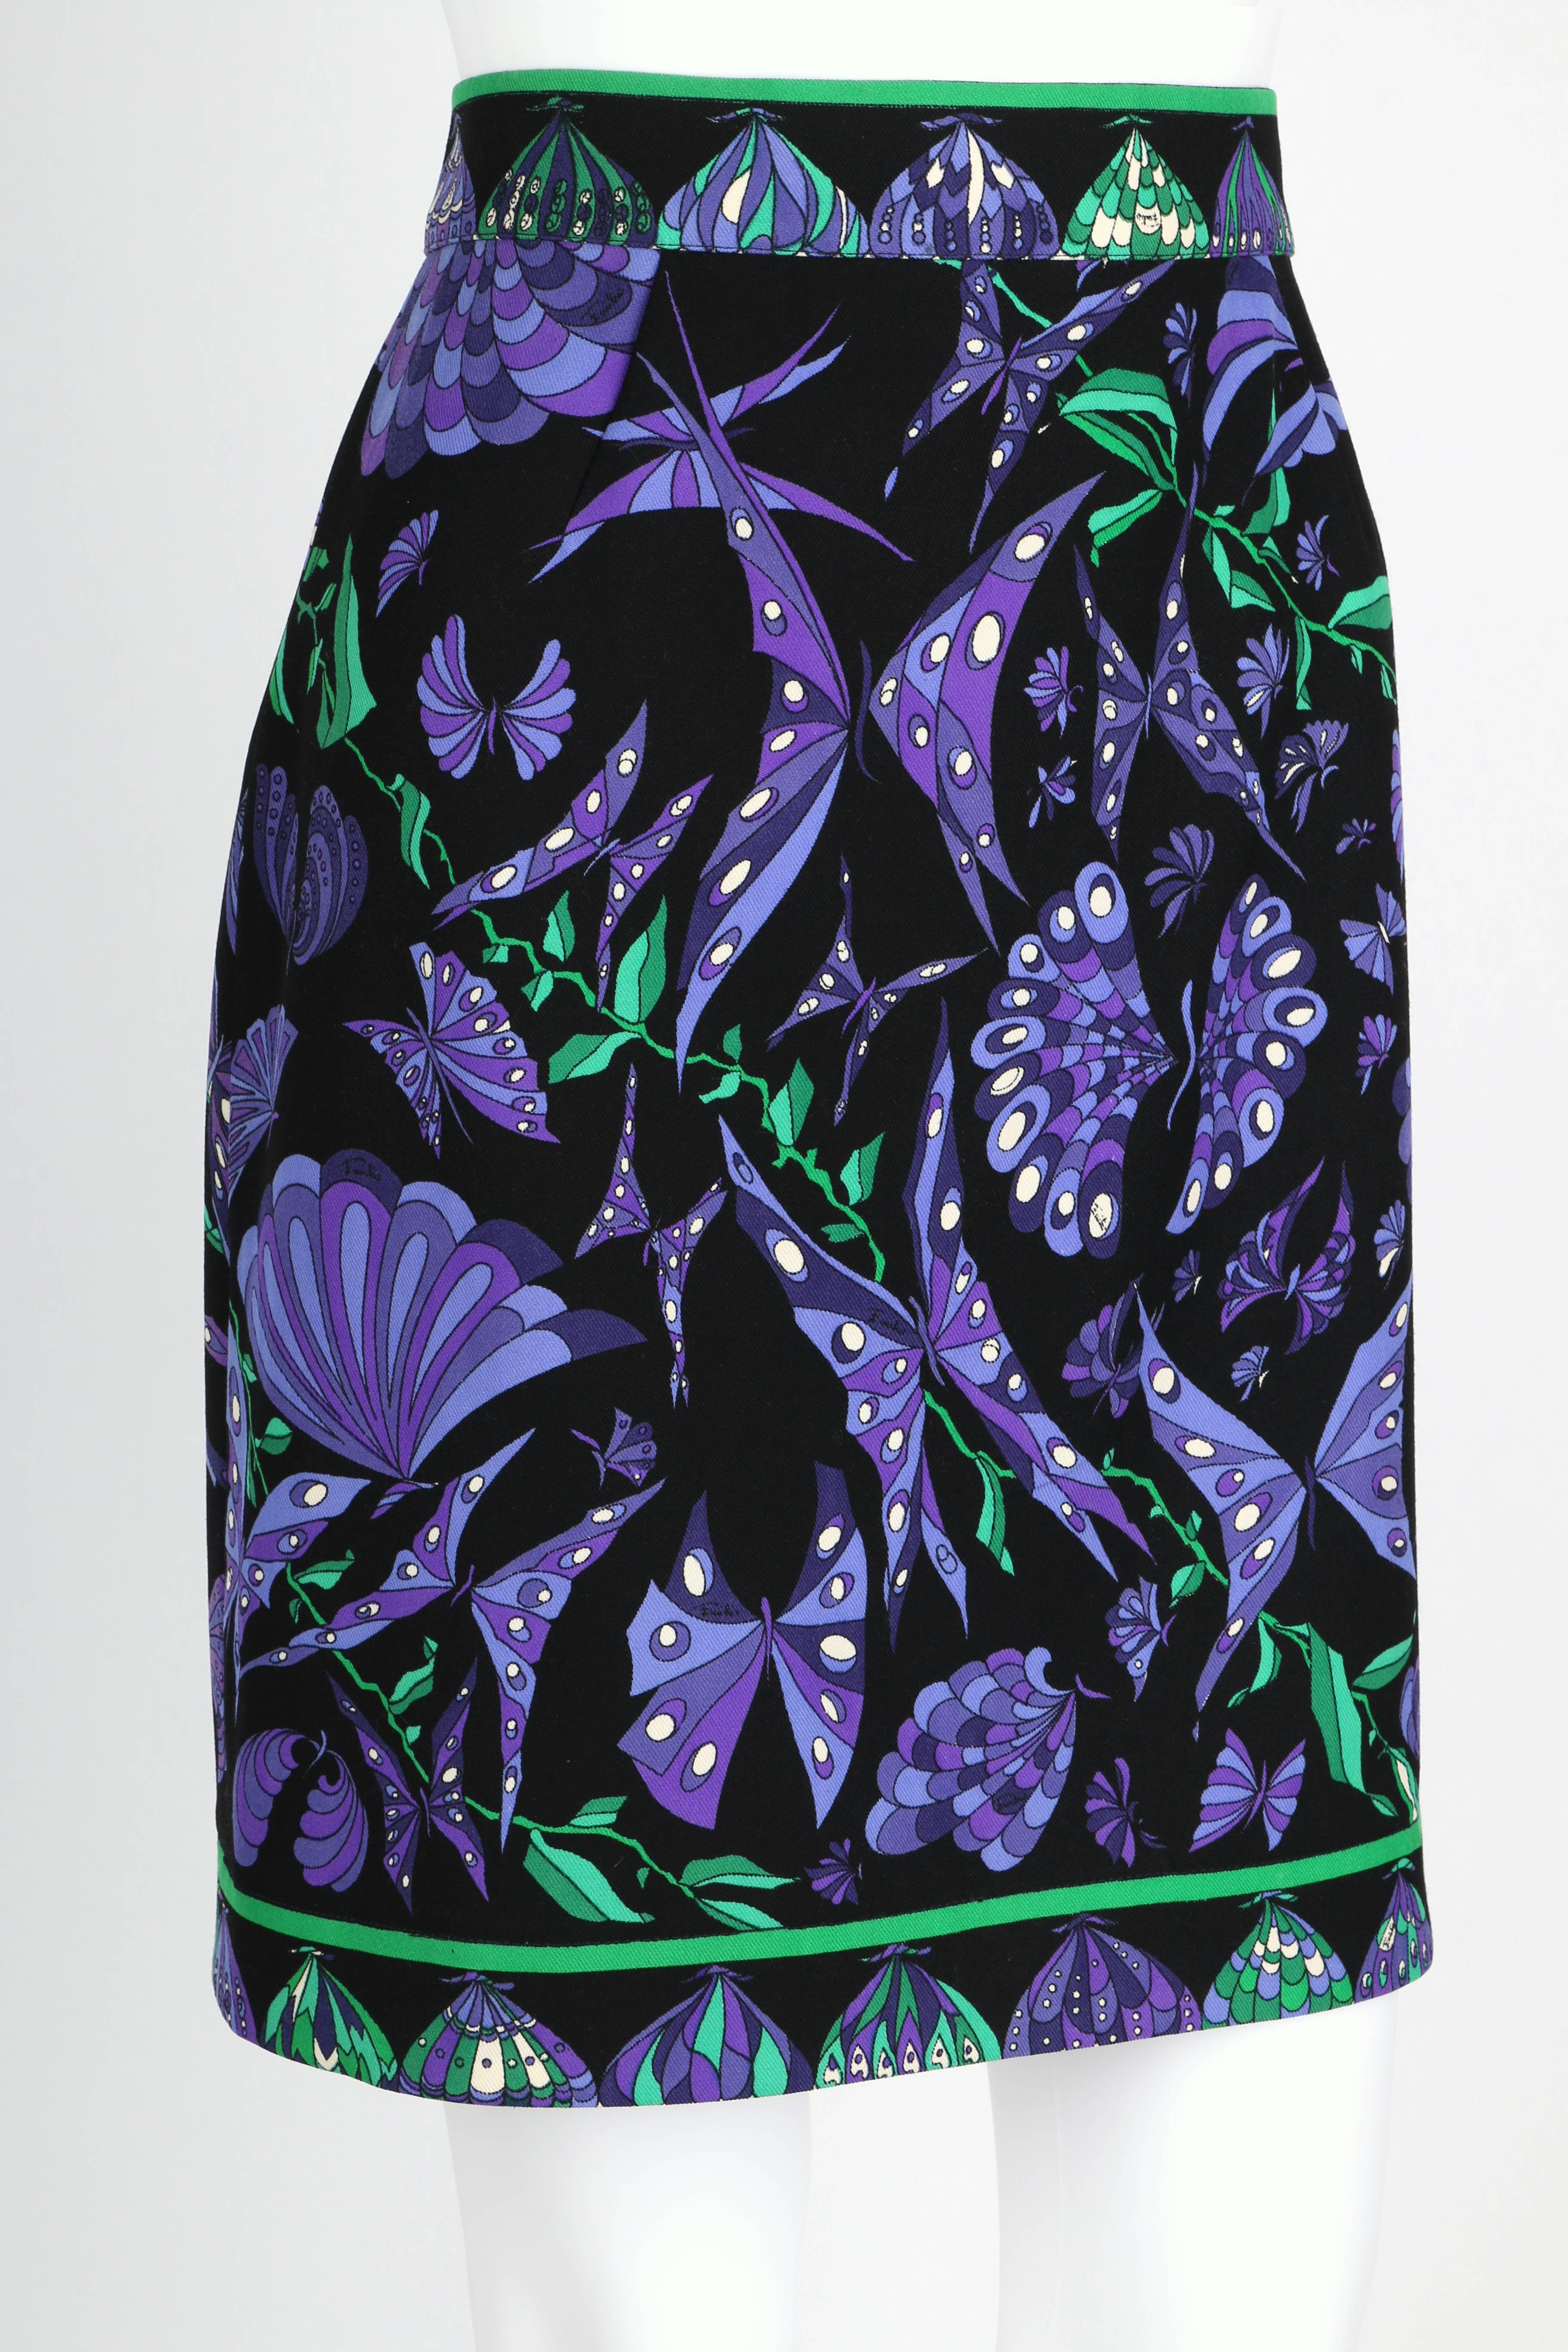 Emilio Pucci c.1970's black, purple and green butterfly signature print wool A-line skirt. Butterfly wing decorative border on waist, closure, and hem. Back zipper and button closure. Fully lined. Marked Fabric Content: 